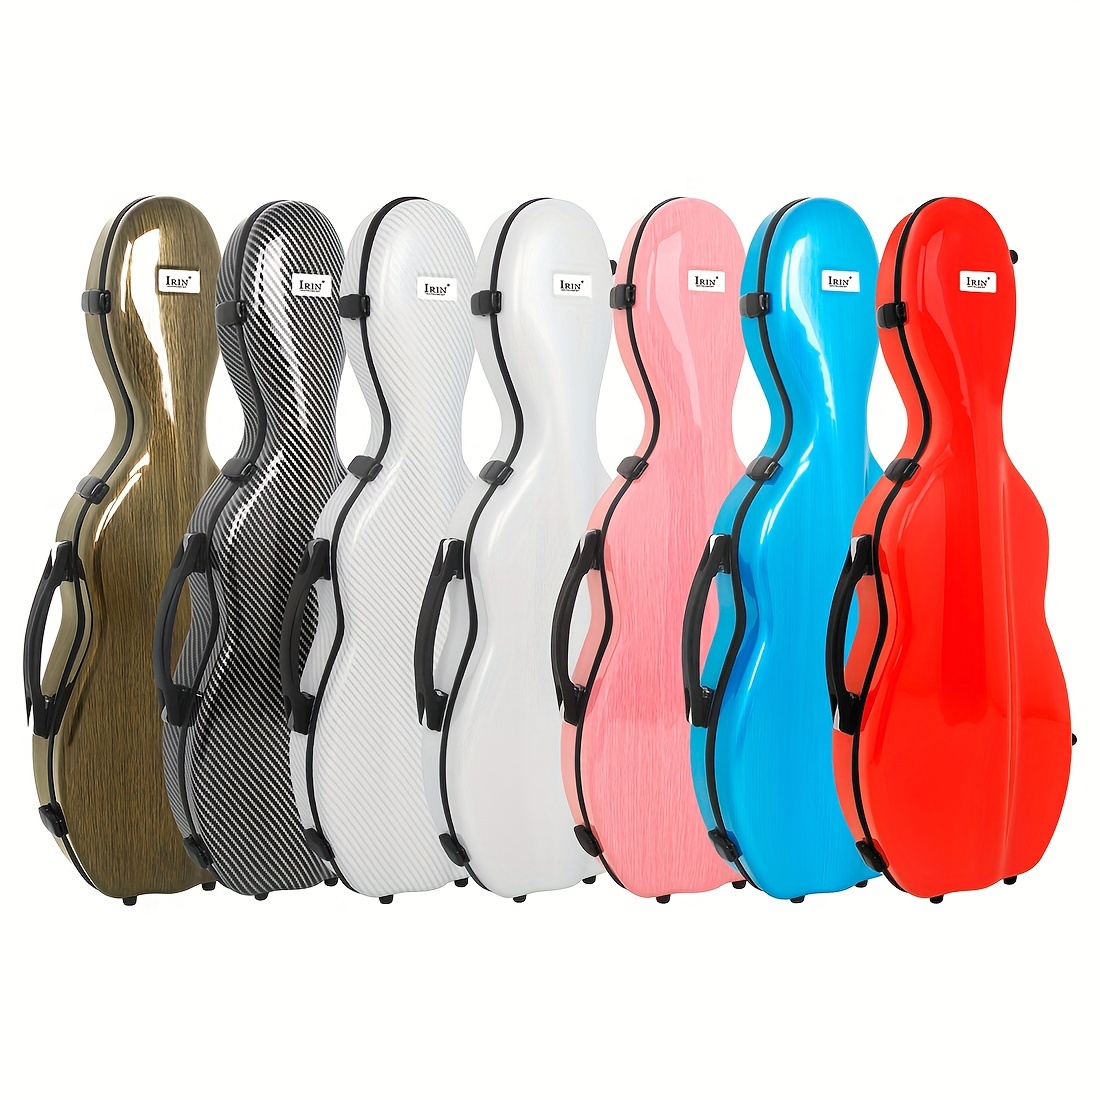 Cello Non-slip Mat T Shaped Endpin Stopper Wooden Board Floor